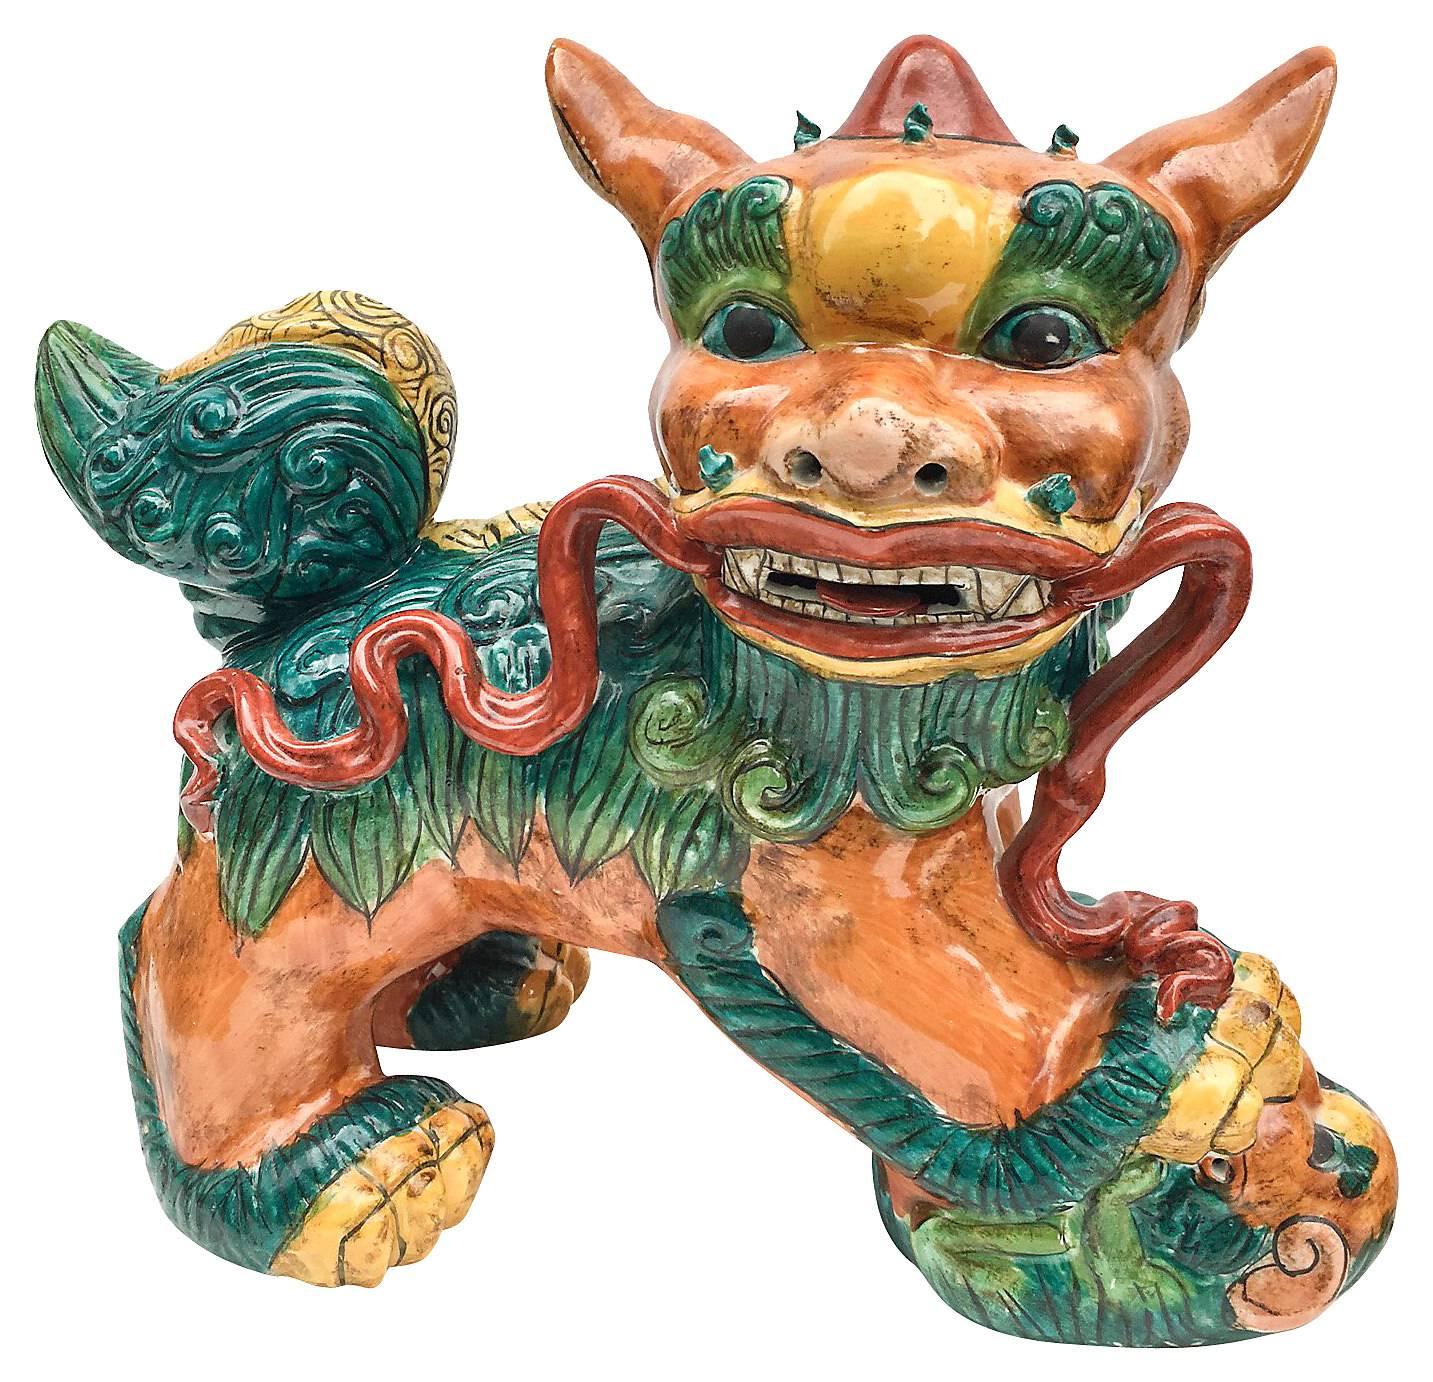 Incredibly detailed pair of brightly colored antique Chinese foo dog statues, late 19th century. Each features a gorgeous polychrome glaze in shades of warm umber, Chinese red, emerald green, and teal. Note the detail of the red ribbon running